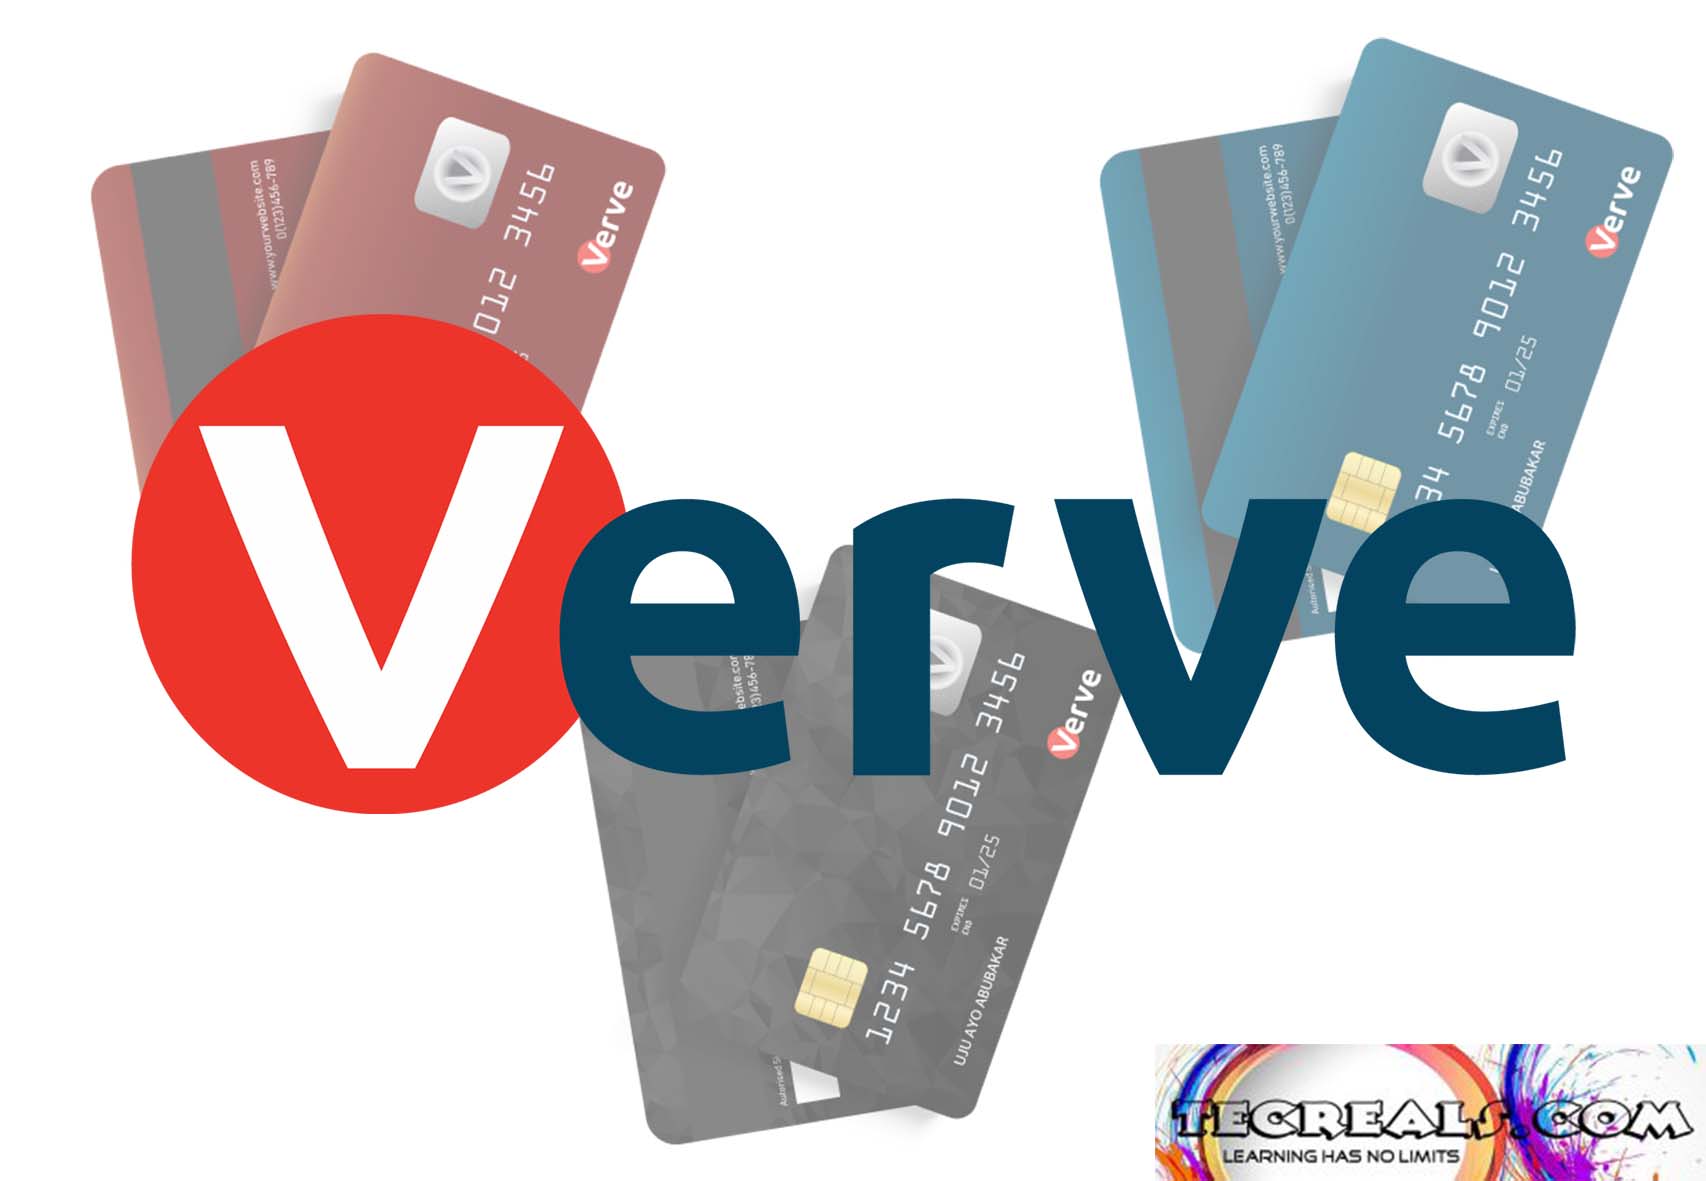 Verve Card Reviews: Types and Benefits if Using the Verve Card